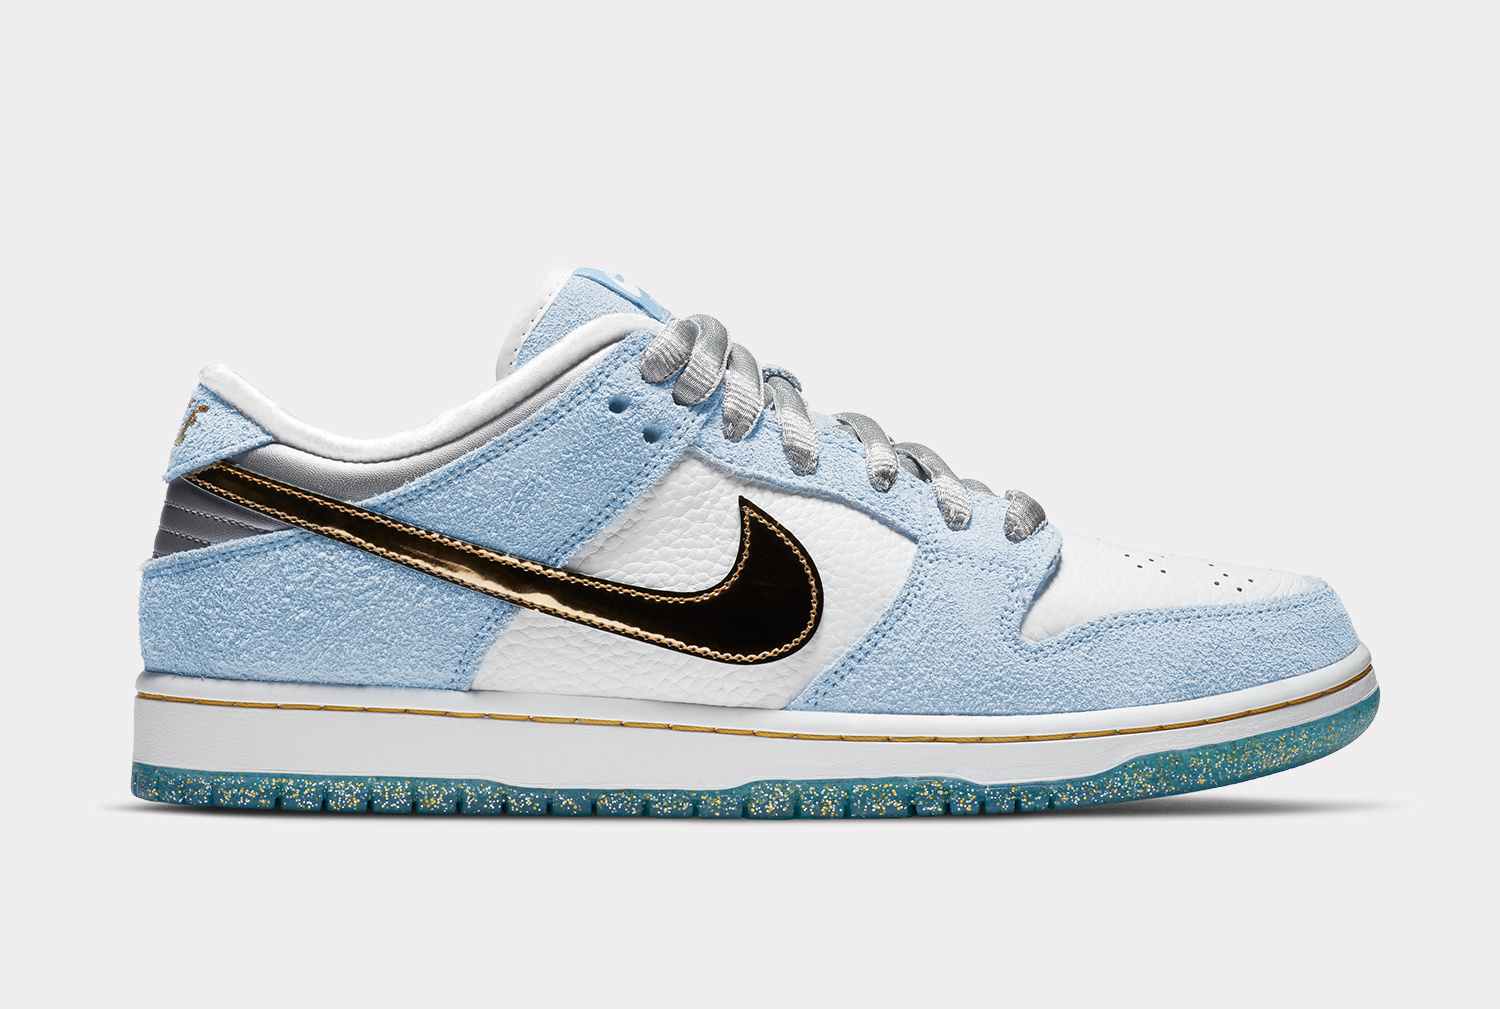 Launches - 17.12.20 - Nike SB x Sean Cliver Dunk Low Pro 